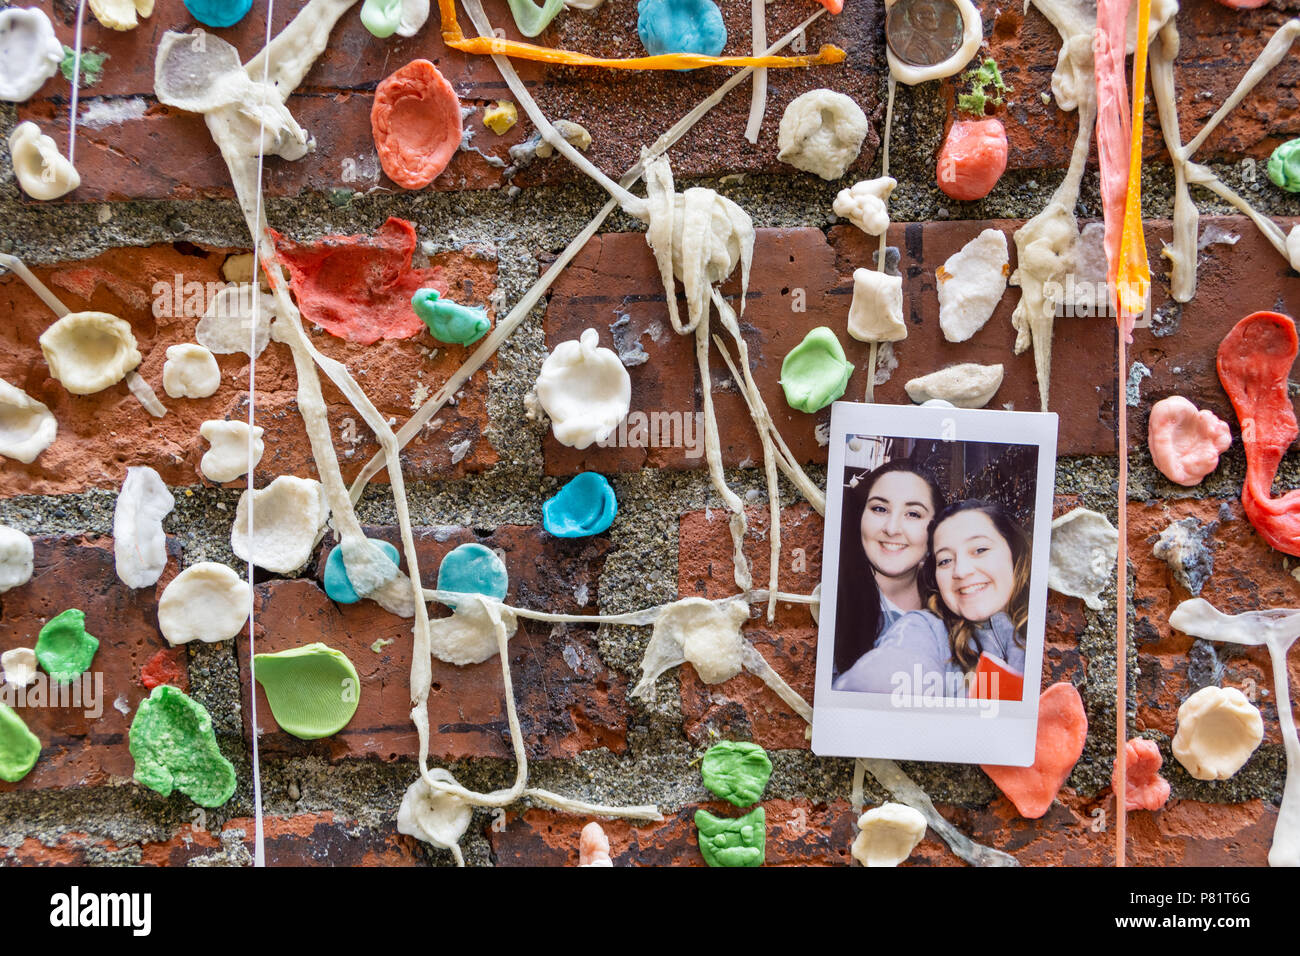 Detail of the famous Market Theater Gum Wall, local Seattle landmark located in Post Alley under Pike Place Market, WA, USA. Stock Photo